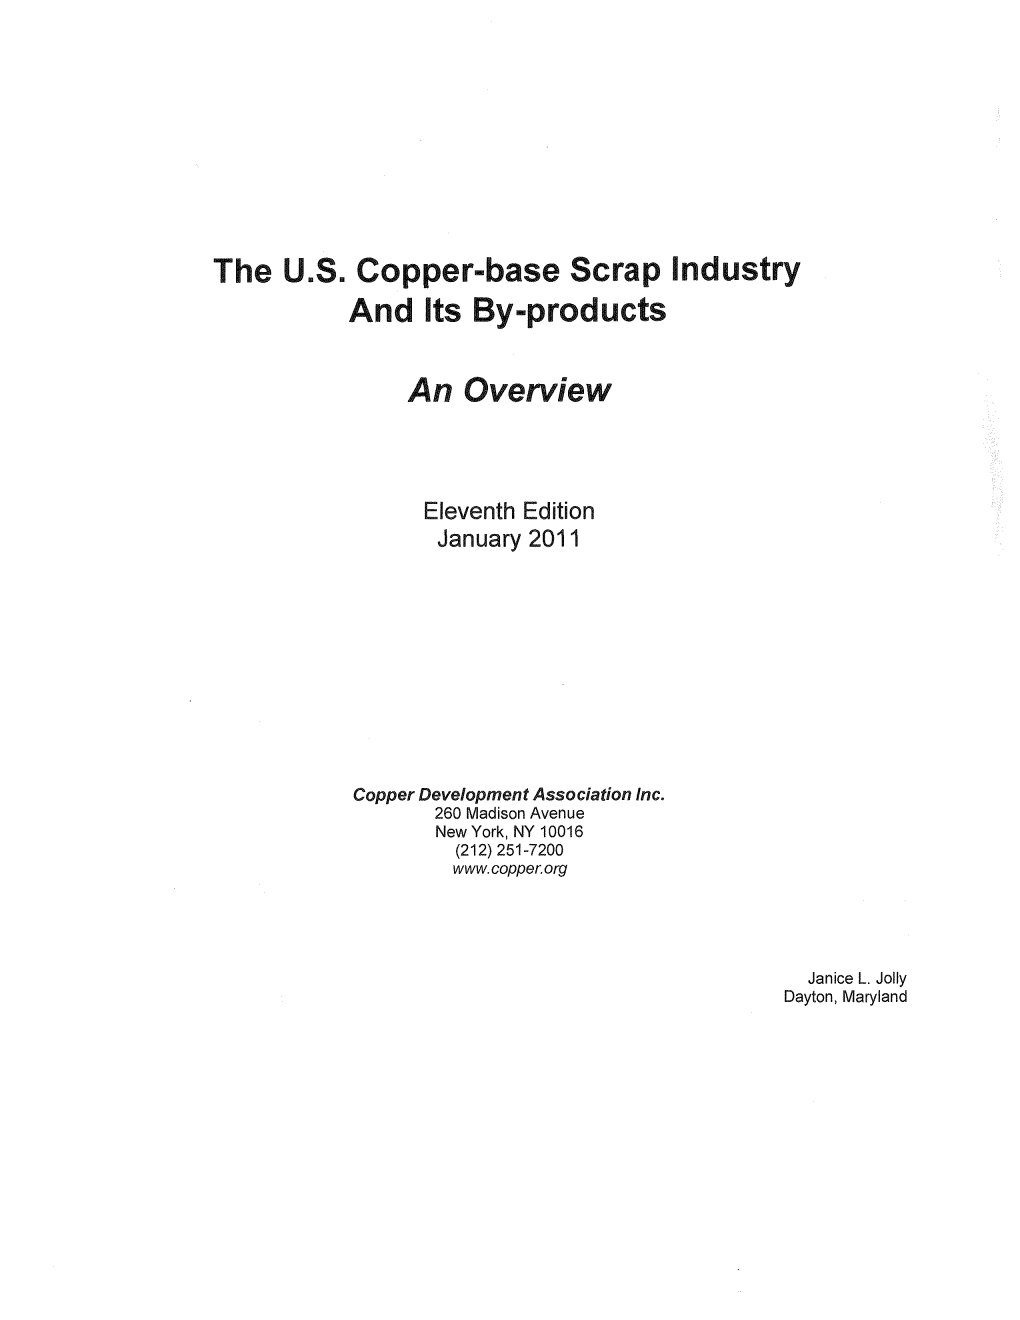 Ie U.S. Copper-Base Scrap Industry and Its By-Products